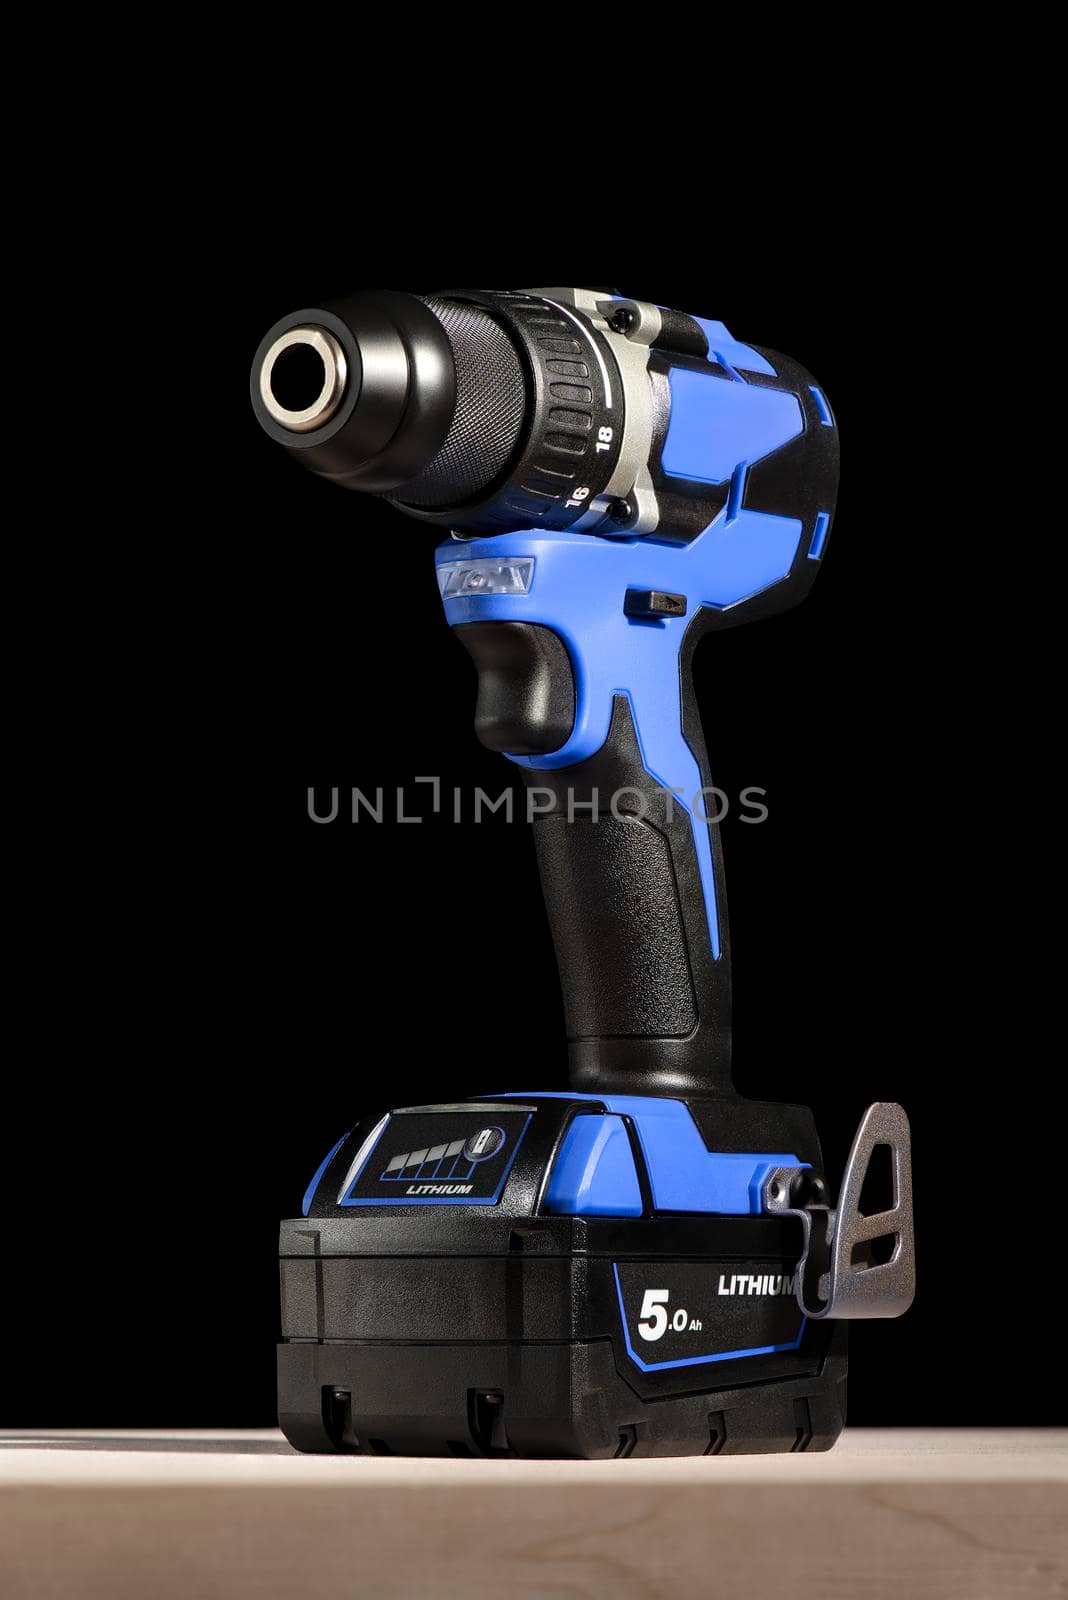 Cordless drill stands on a wooden table on a black background. Cordless drill with lithium-ion battery in blue. Professional tool for drilling holes and driving screws